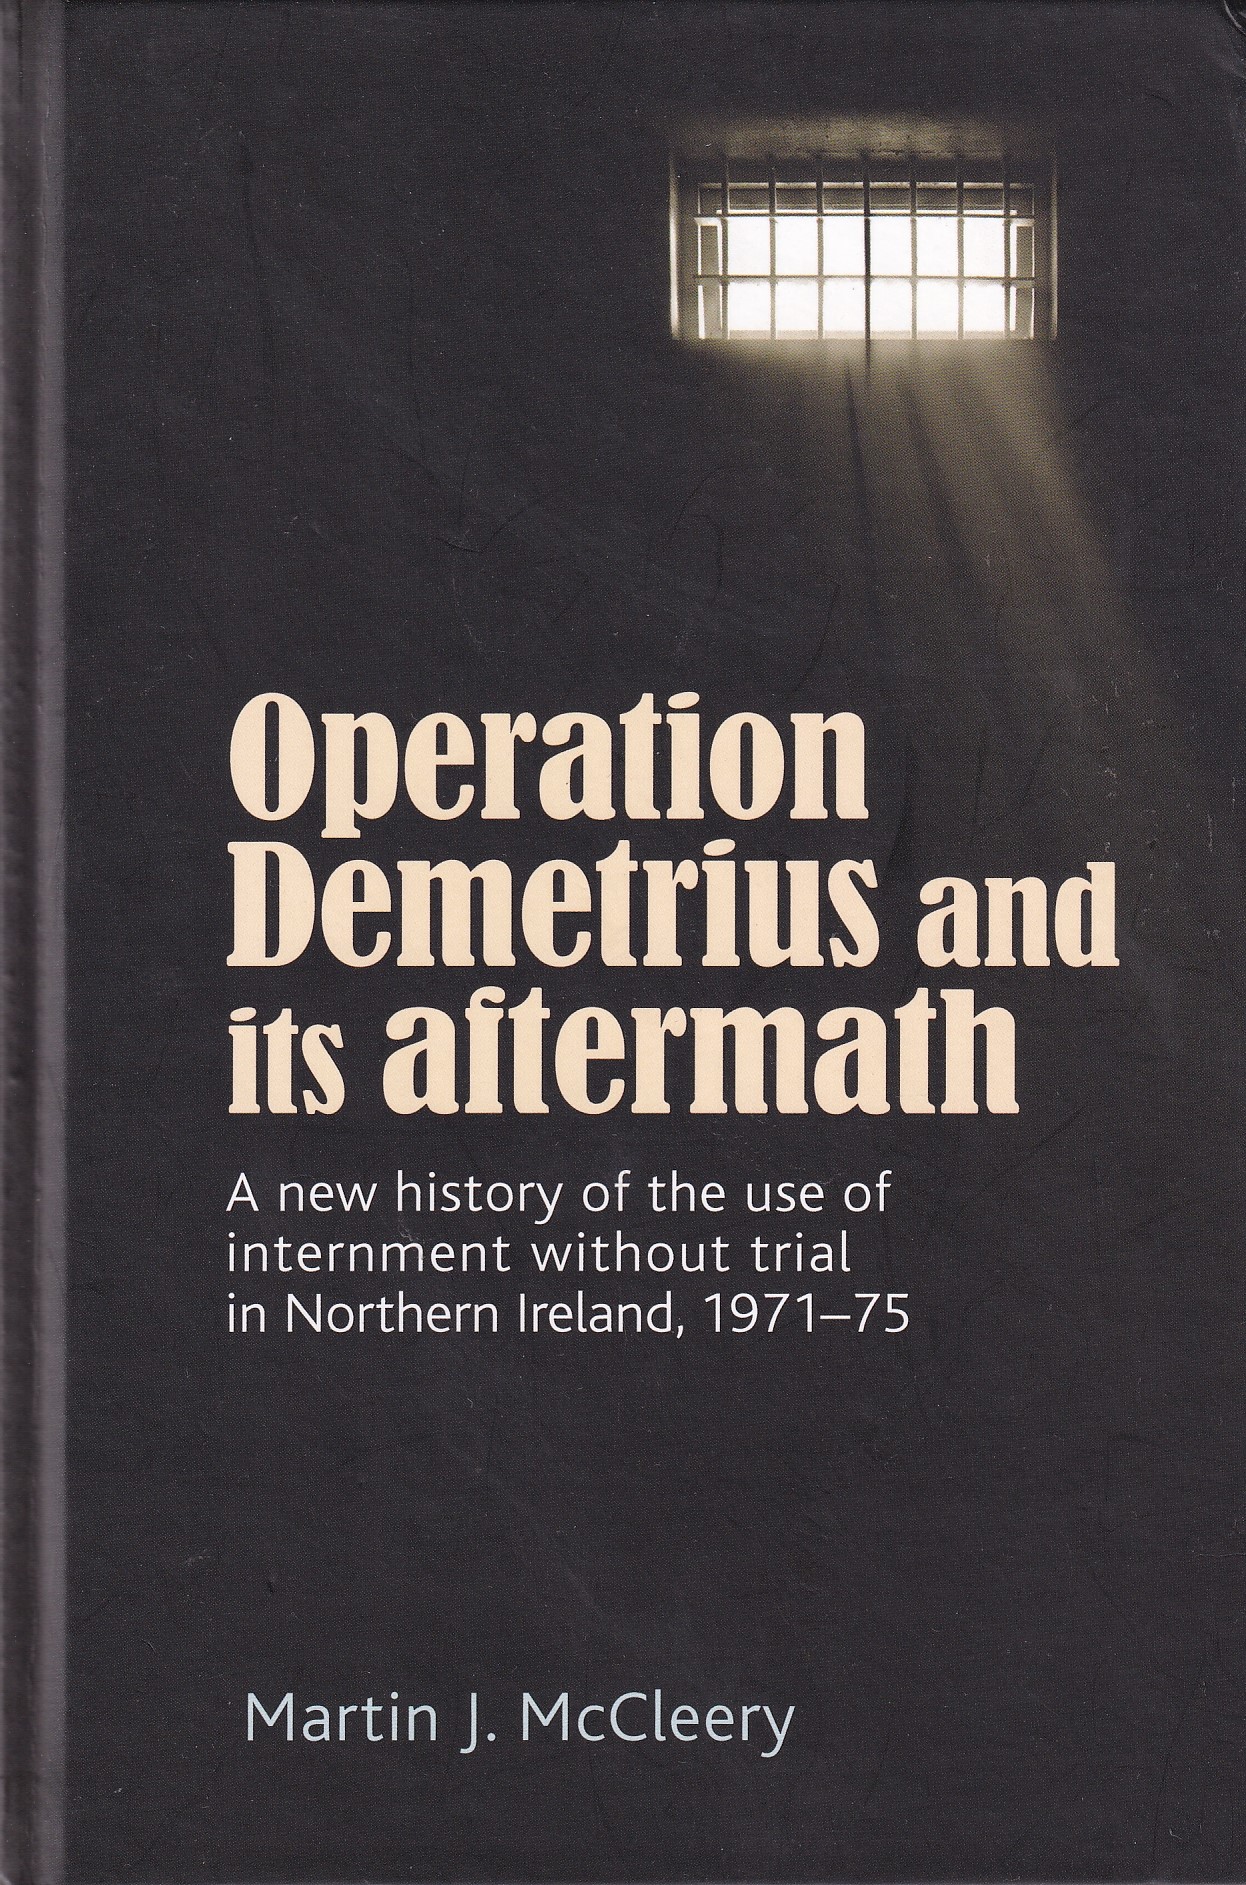 Operation Demetrius and its aftermath A new history of the use of internment without trial in Northern Ireland 1971-75 | Martin J. McCleery | Charlie Byrne's